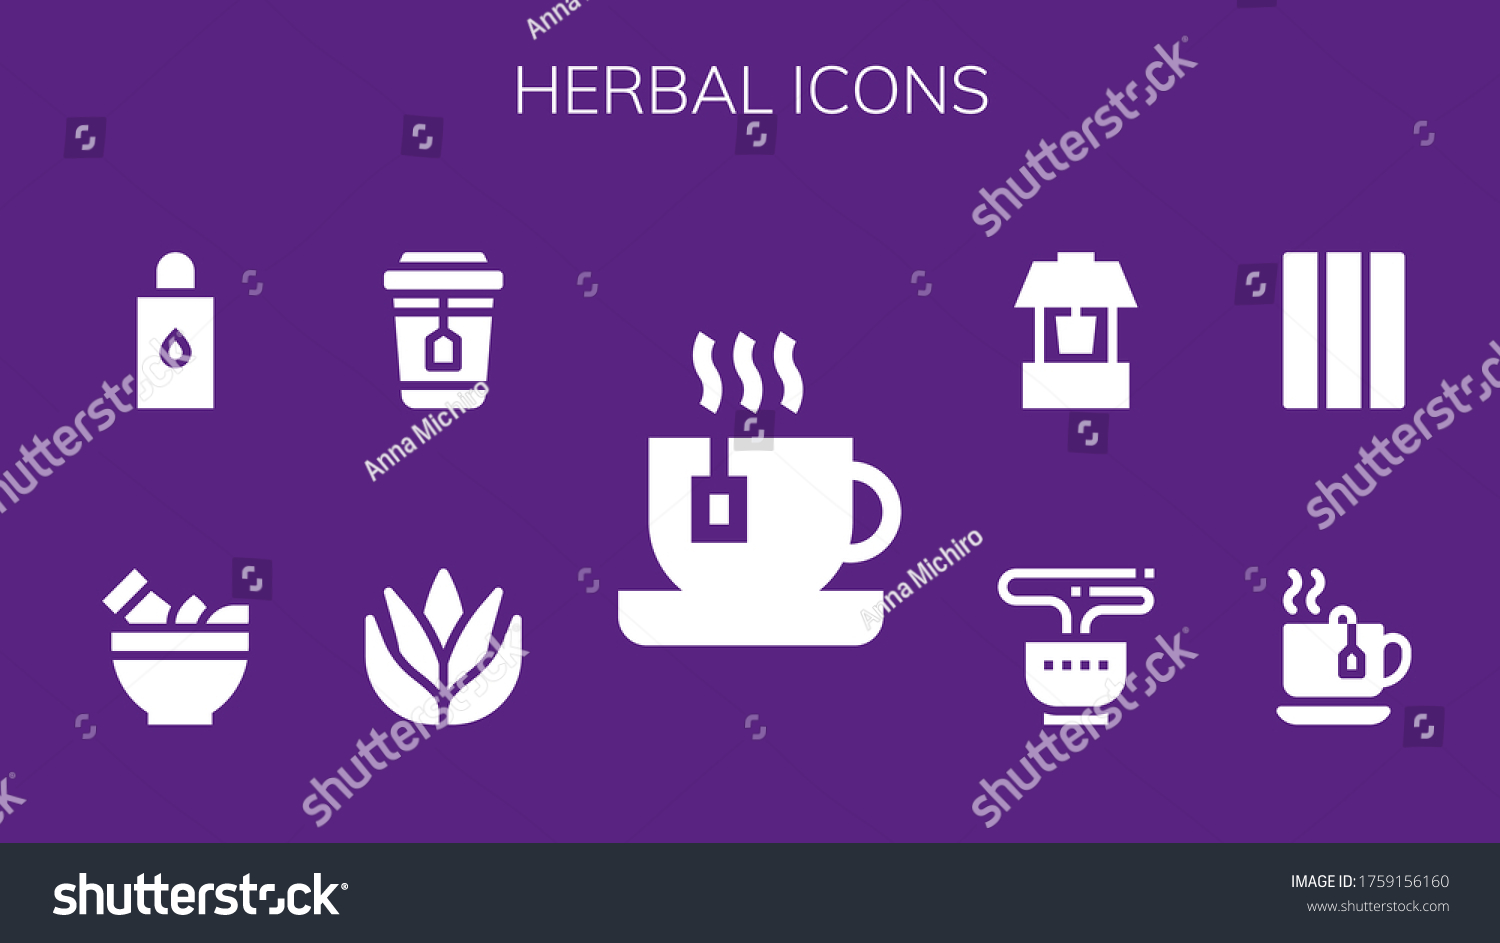 SVG of herbal icon set. 9 filled herbal icons.  Simple modern icons such as: Tea, Aloe vera, Mortar, Body oil, Chewing gum, Well svg